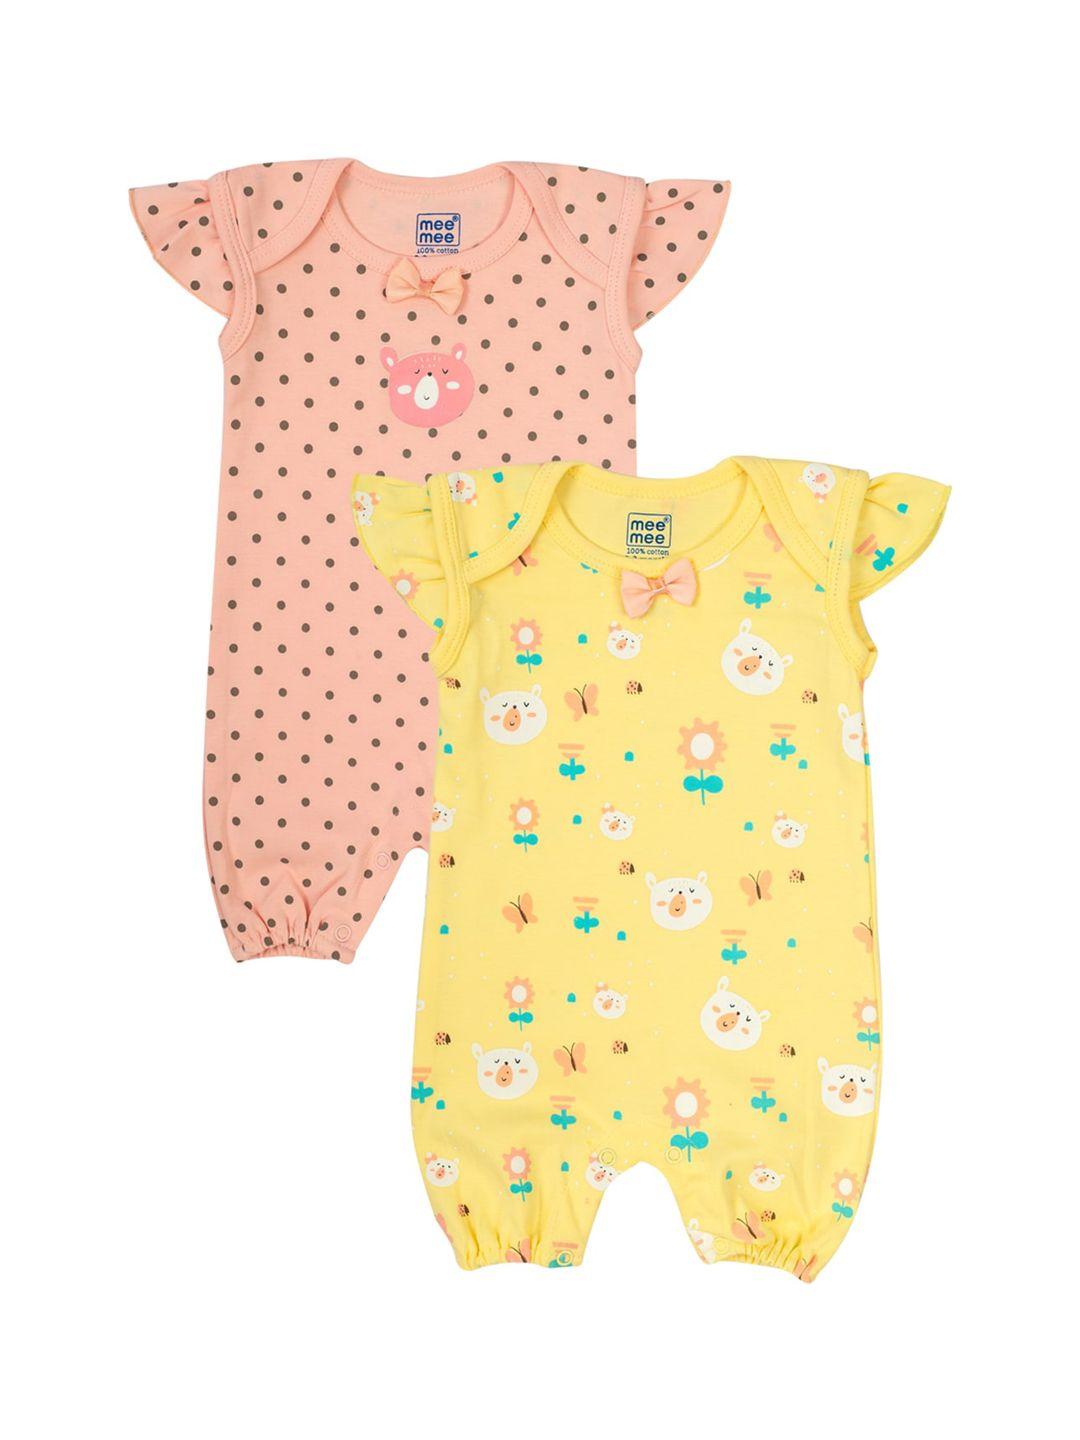 meemee infant girls pack of 2 yellow & white printed cotton rompers